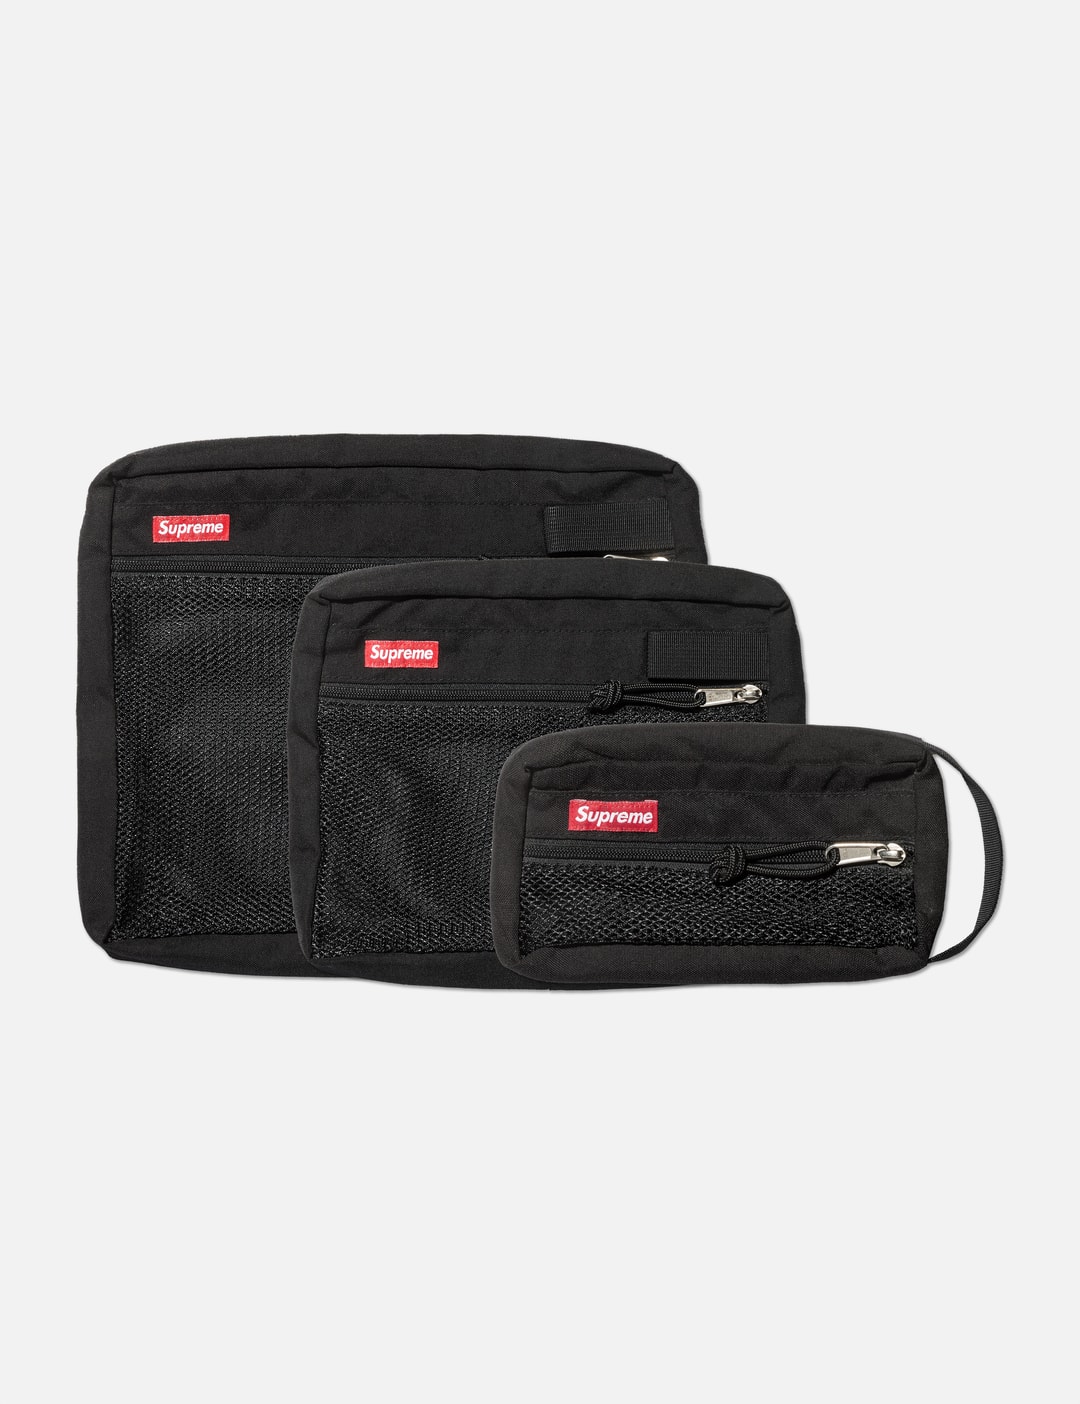 Supreme - SUPREME 3 TRAVEL BAGS SET  HBX - Globally Curated Fashion and  Lifestyle by Hypebeast